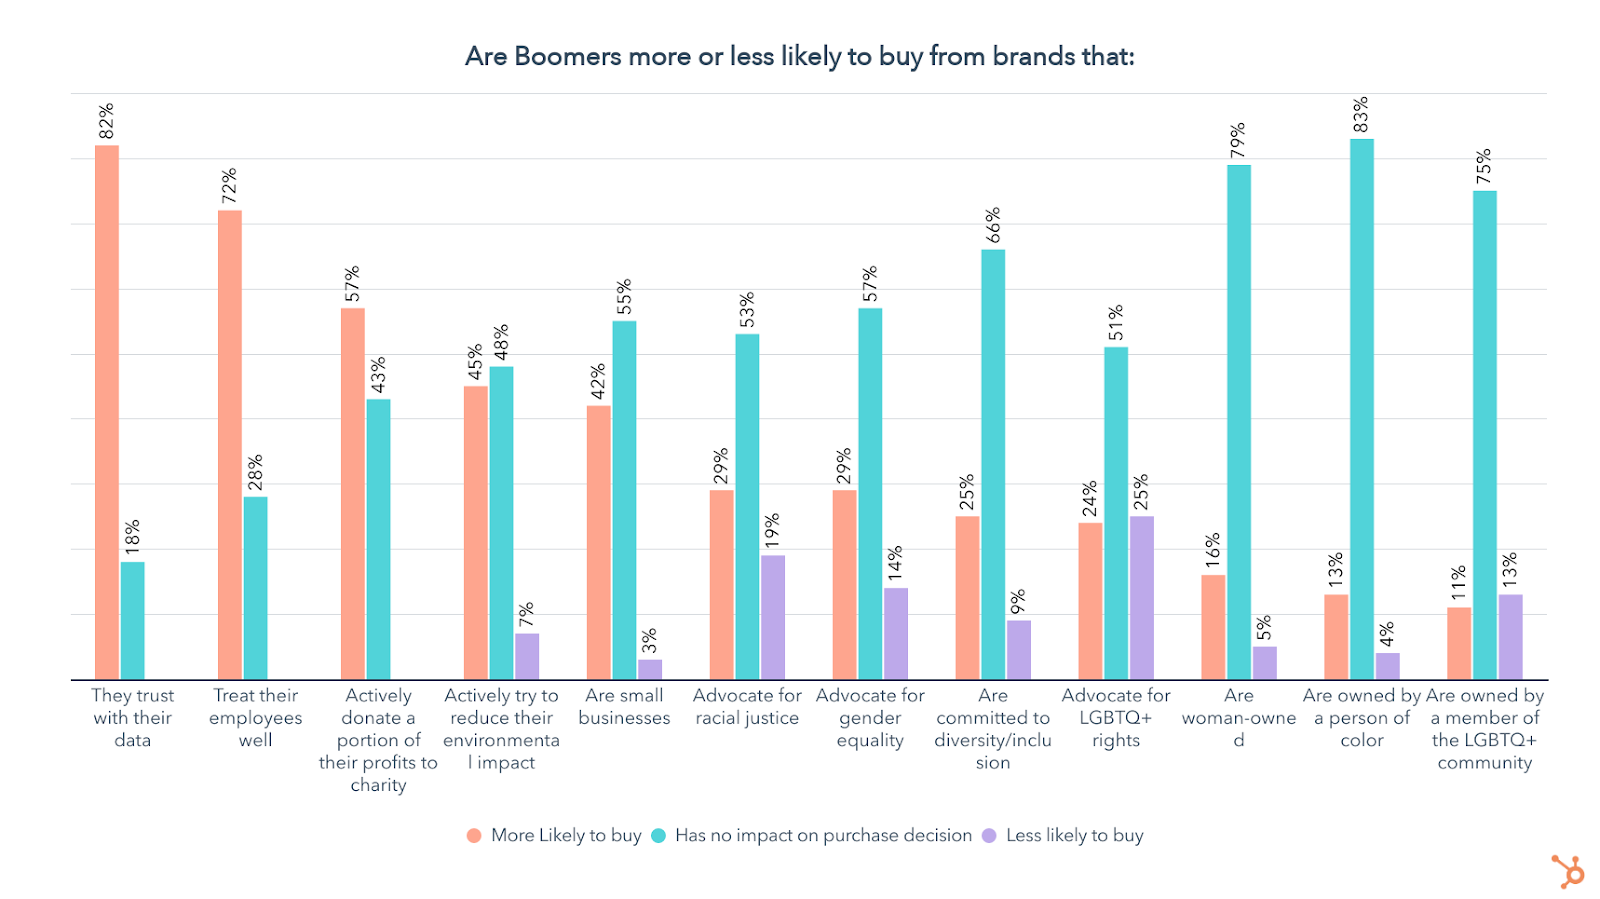 purchase considerations of boomers